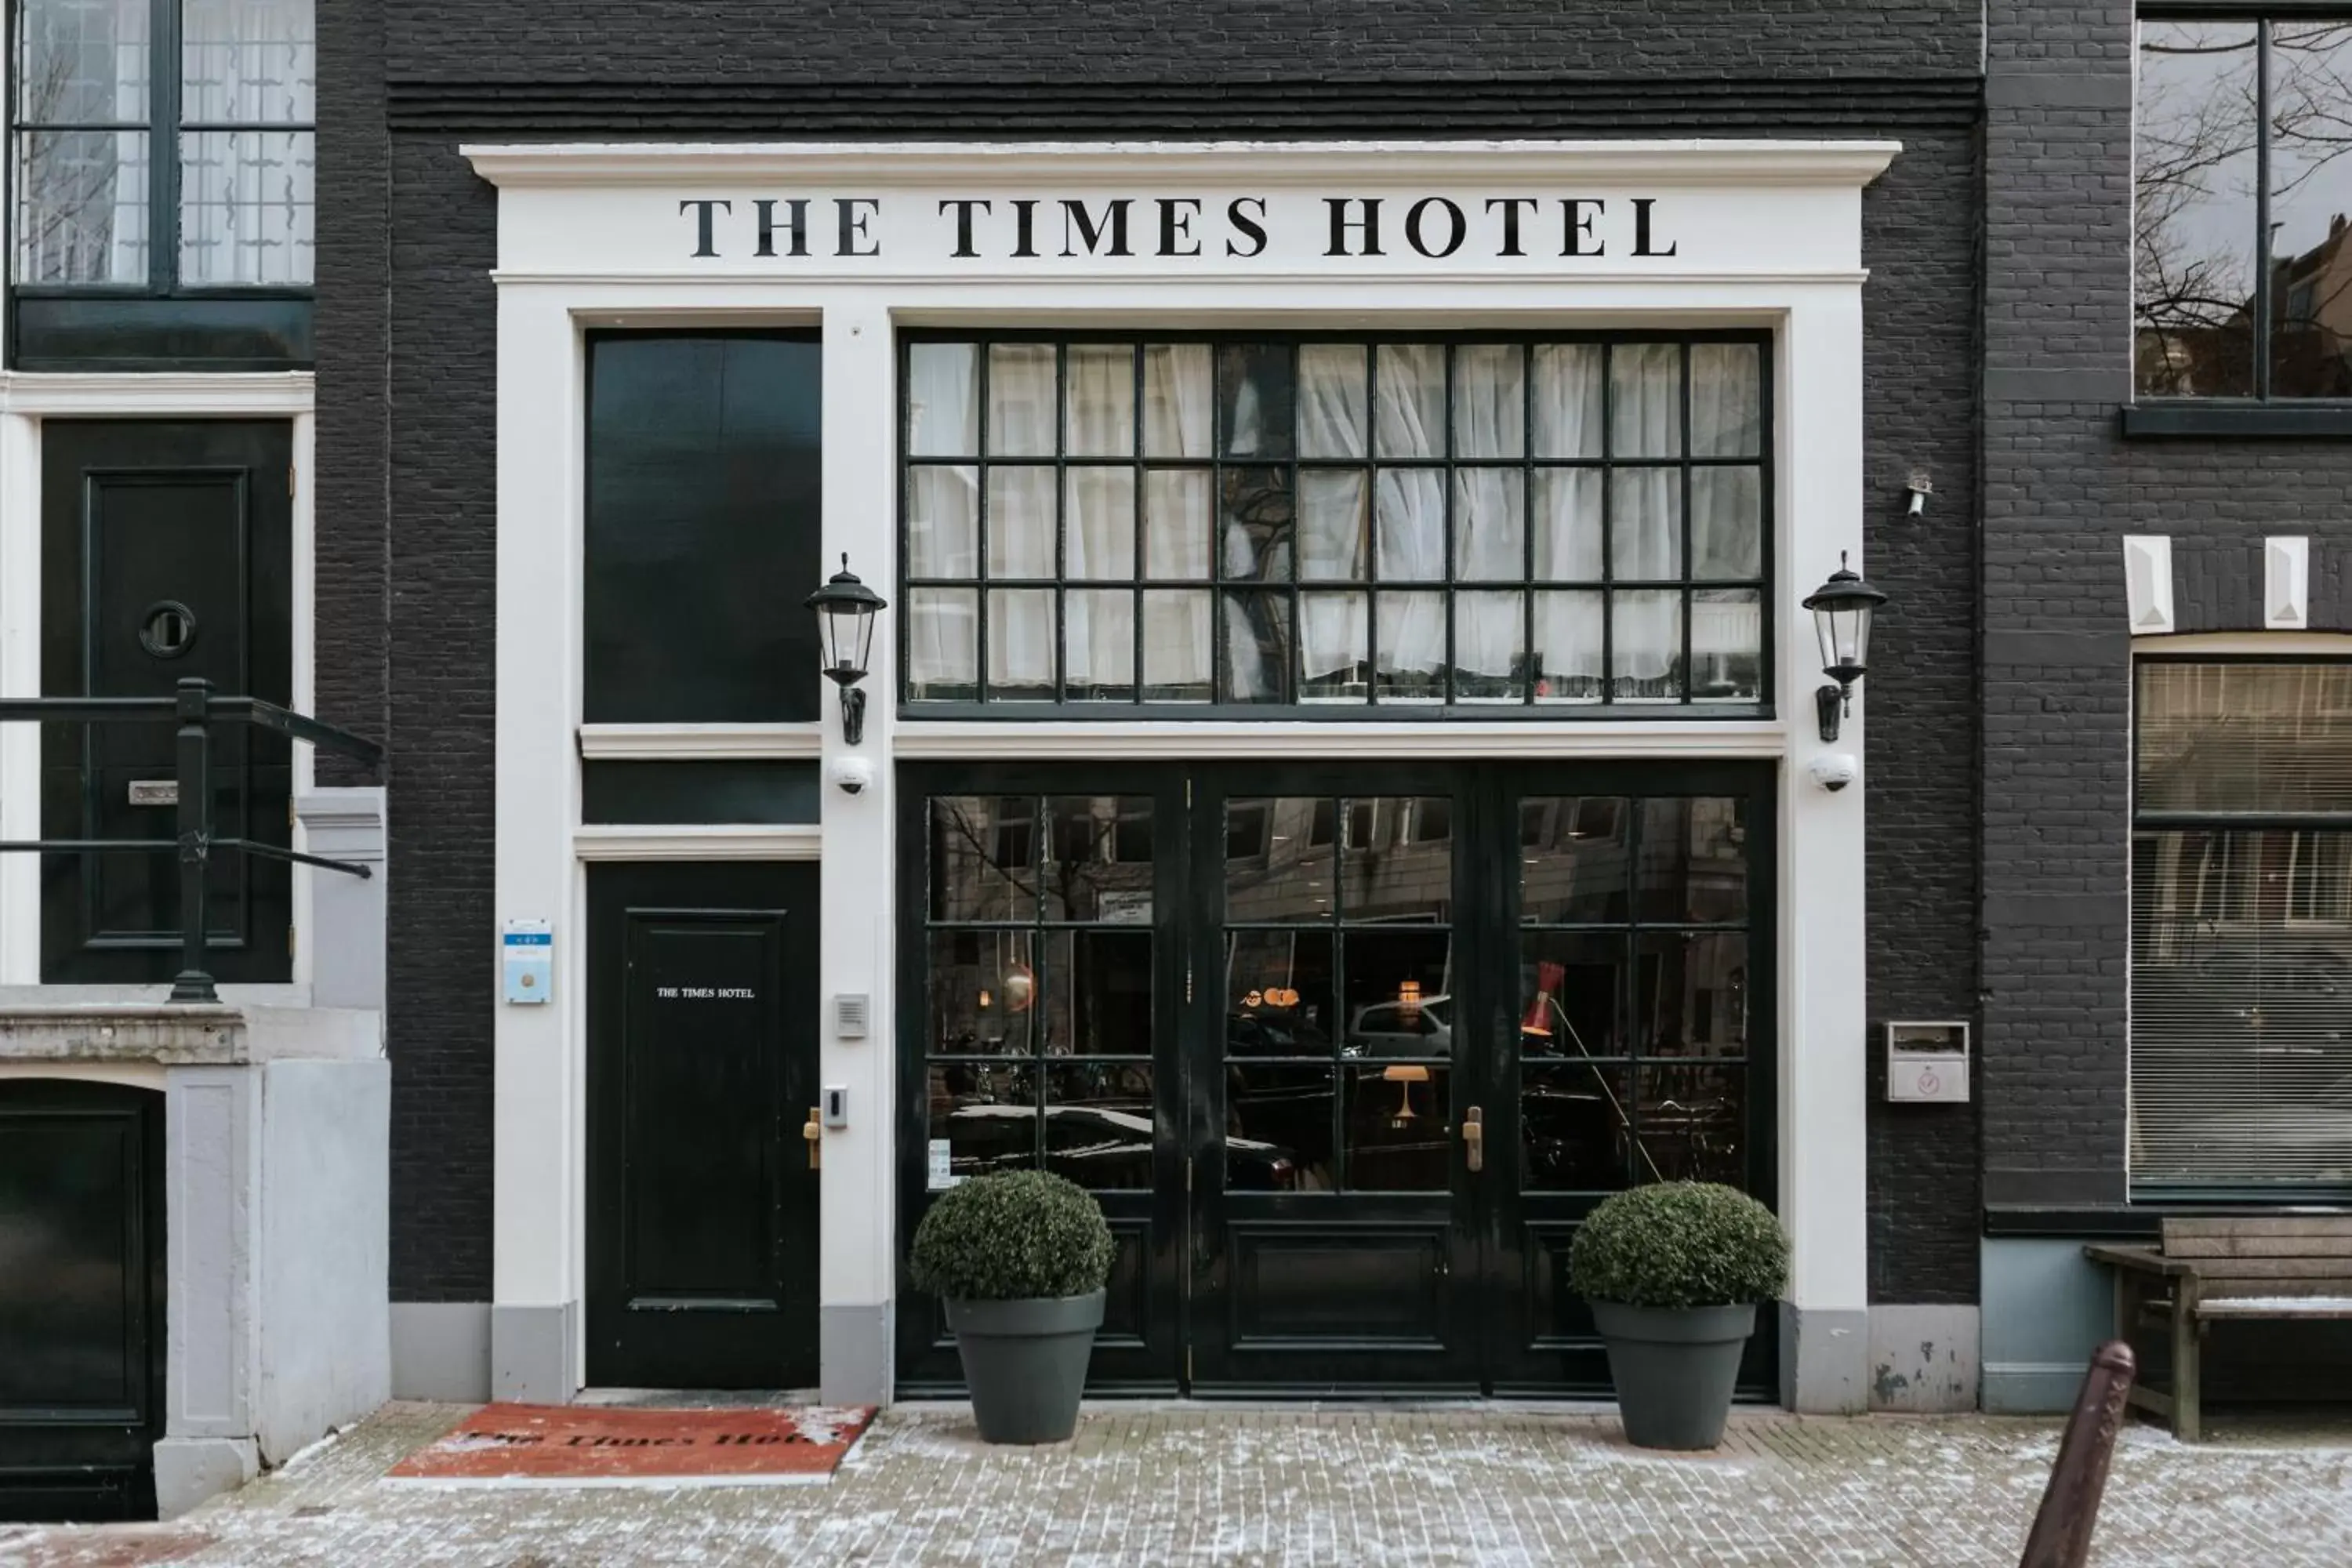 Property building in The Times Hotel